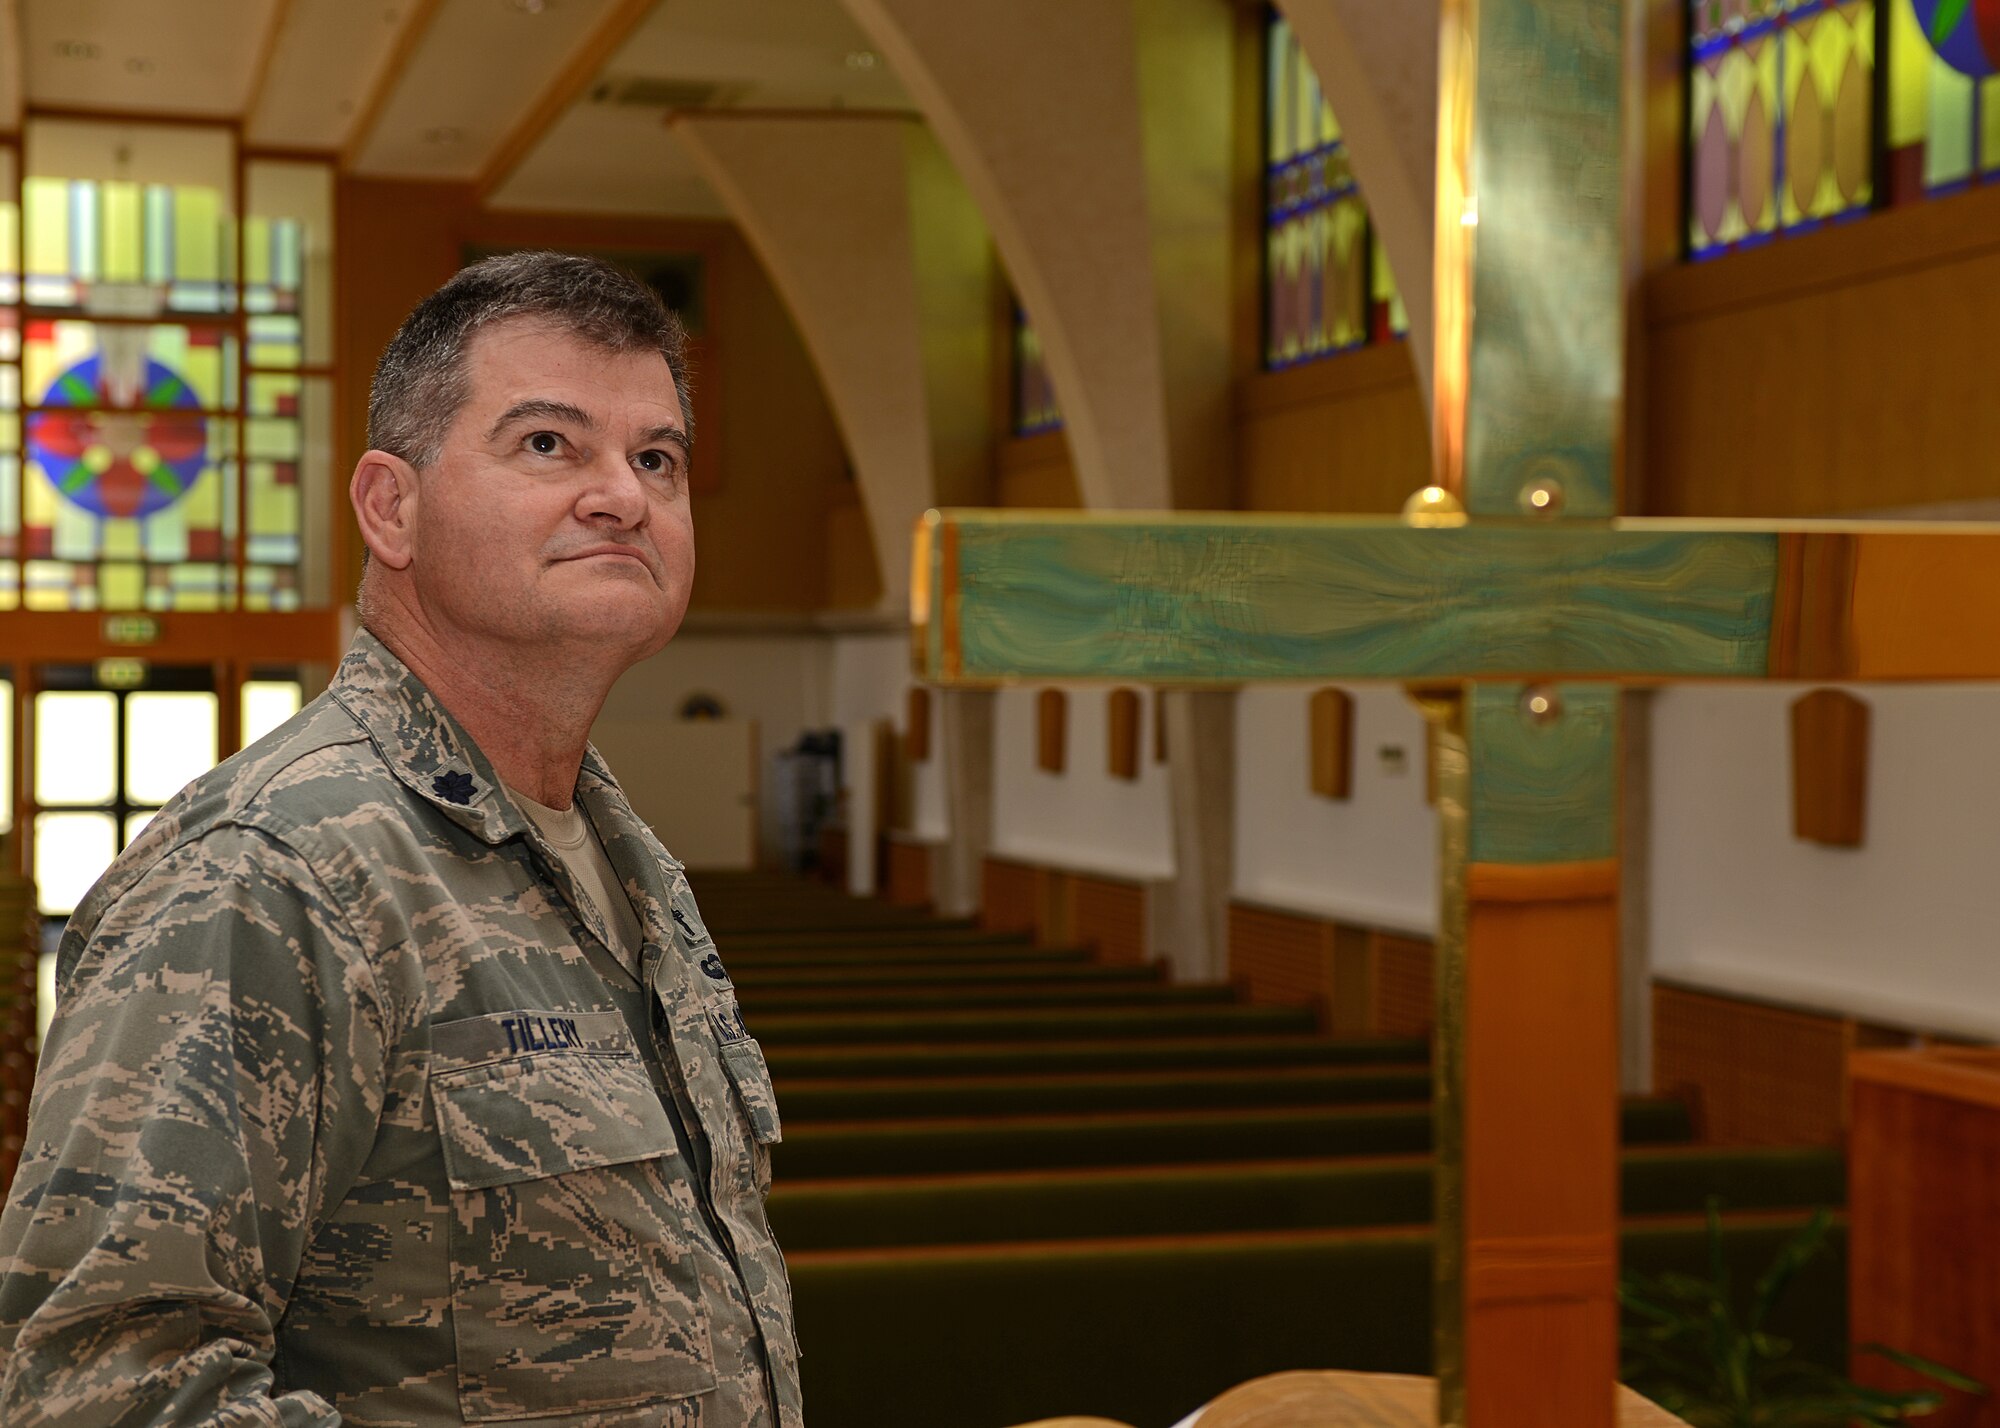 Chaplain (Lt. Col.) John Tillery, reflects on his faith at the Aviano Air Base Chapel in Italy May 15, 2013. Discovering faith helped Tillery recover from a very violent and chaotic upbringing.  (U.S. Air Force photo/Staff Sgt. Ryan Whitney)